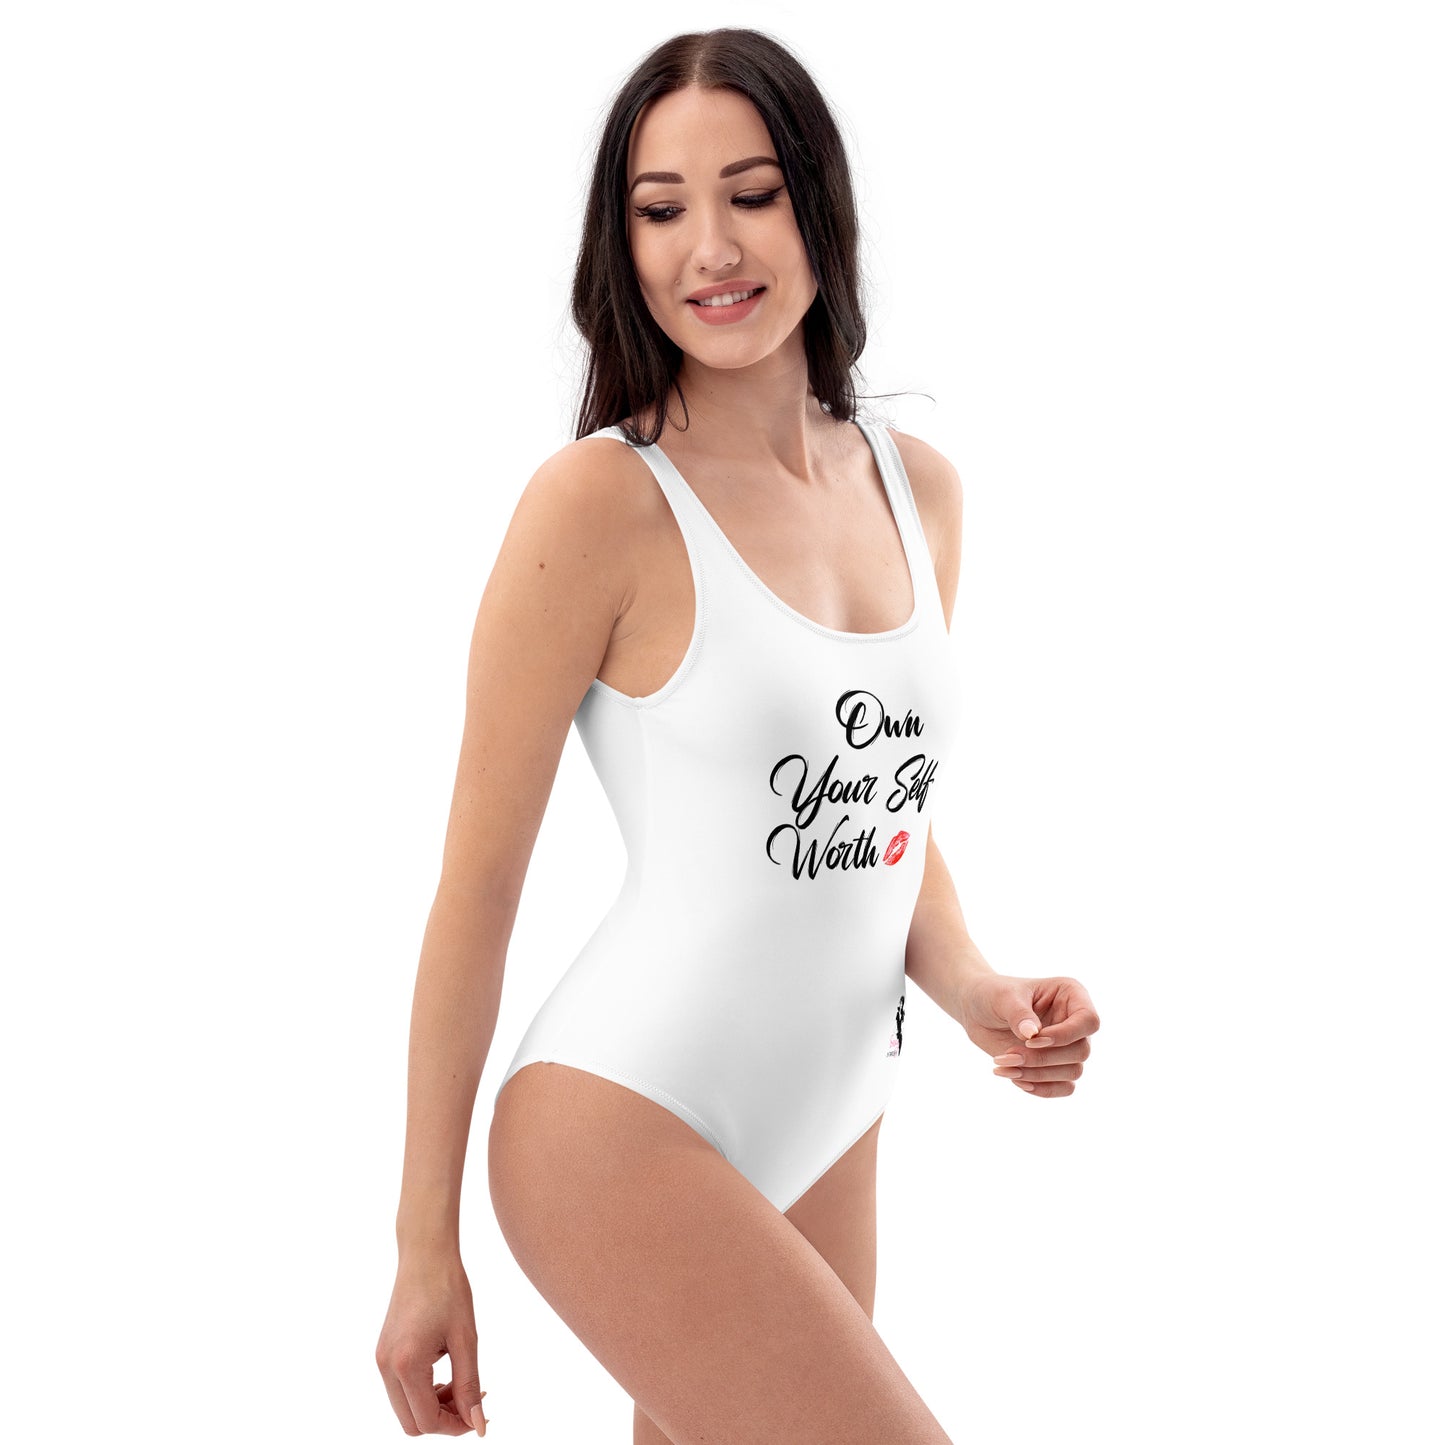 One-Piece Swimsuit - Own your self worth